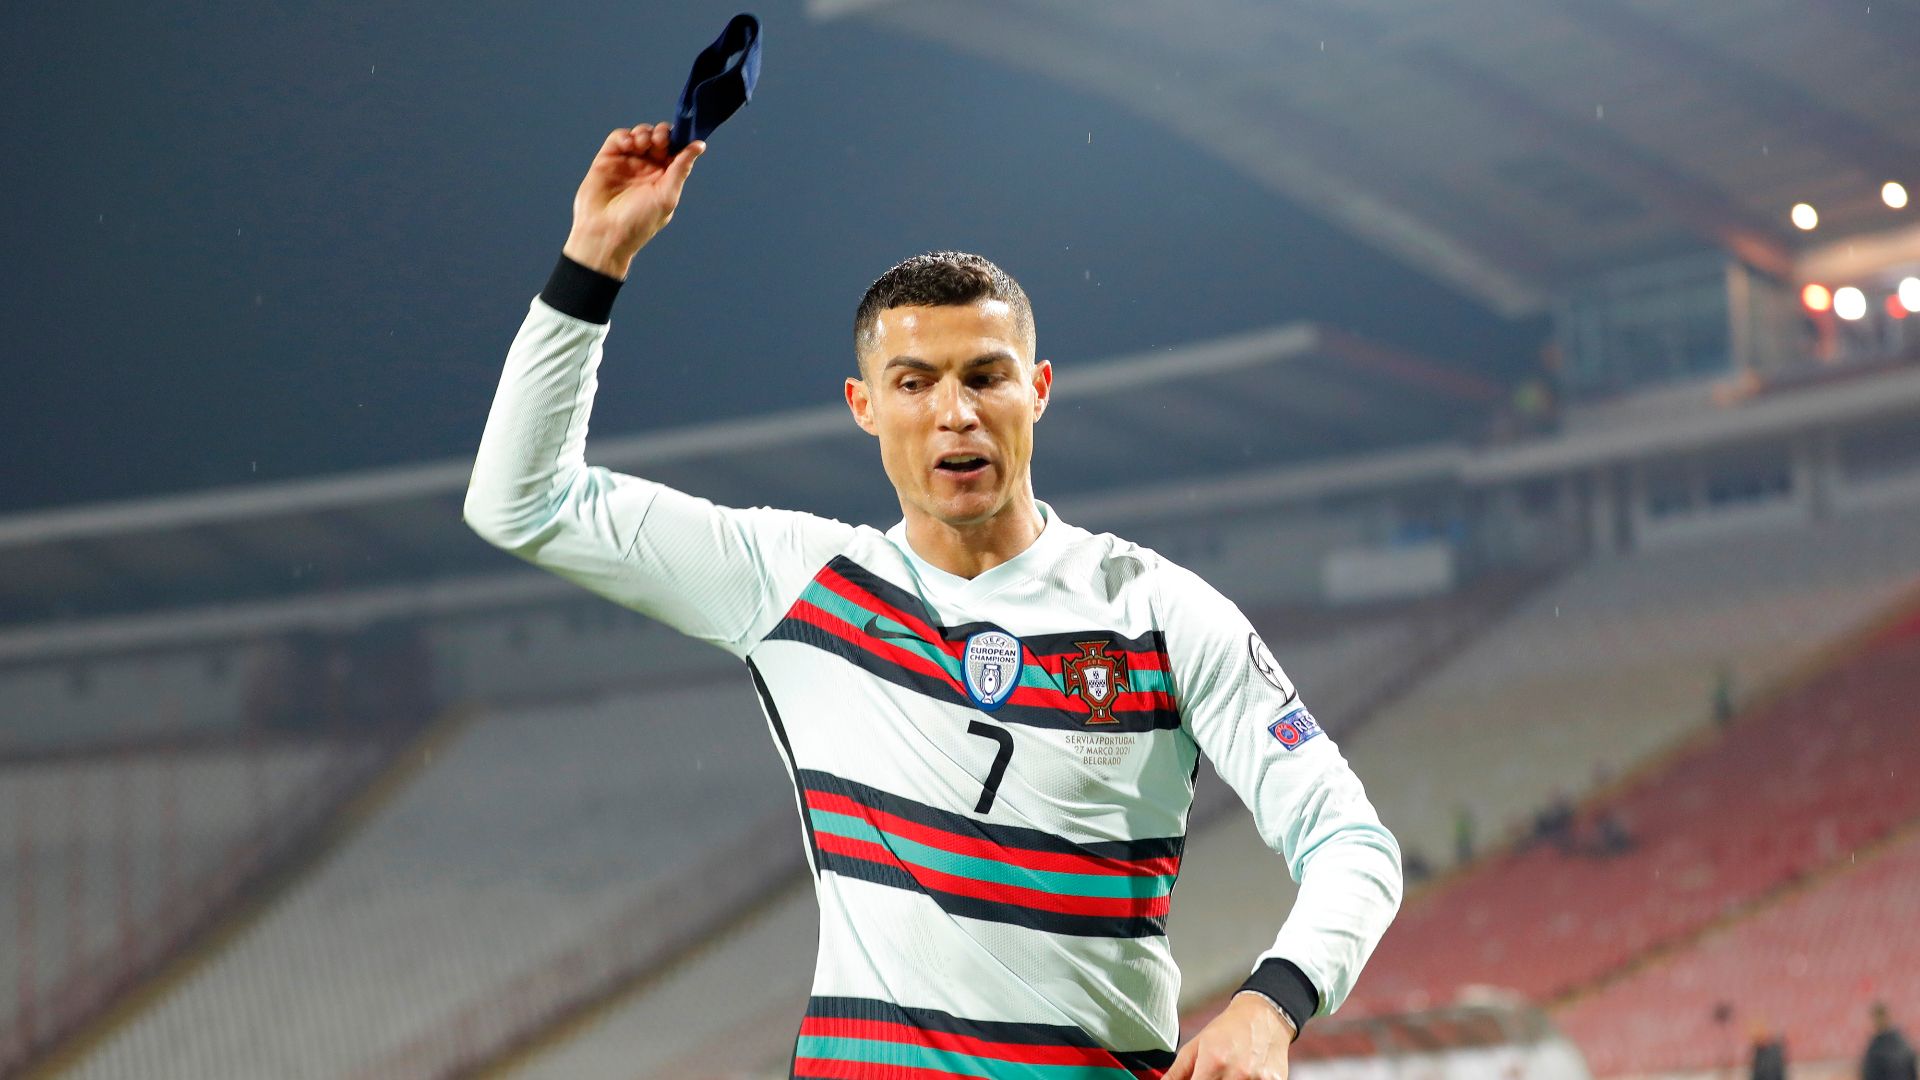 Assistant referee that ruled Ronaldo's 'goal' vs Serbia hadn't crossed line dropped from Euro 2020 officiating team